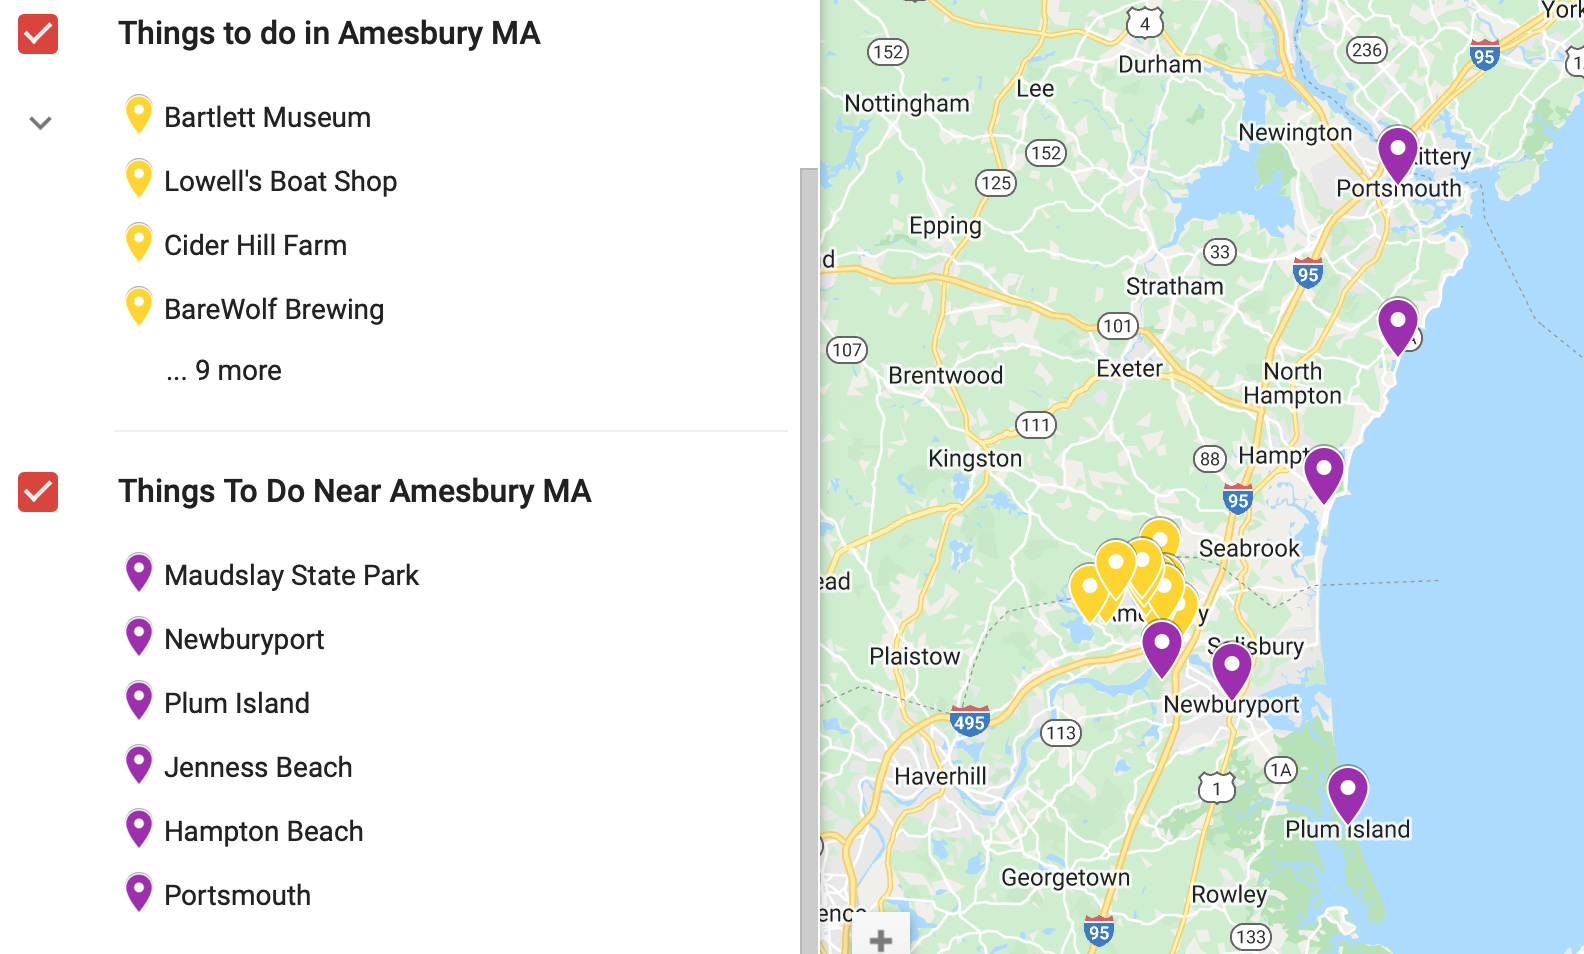 Amesbury MA map of things to do